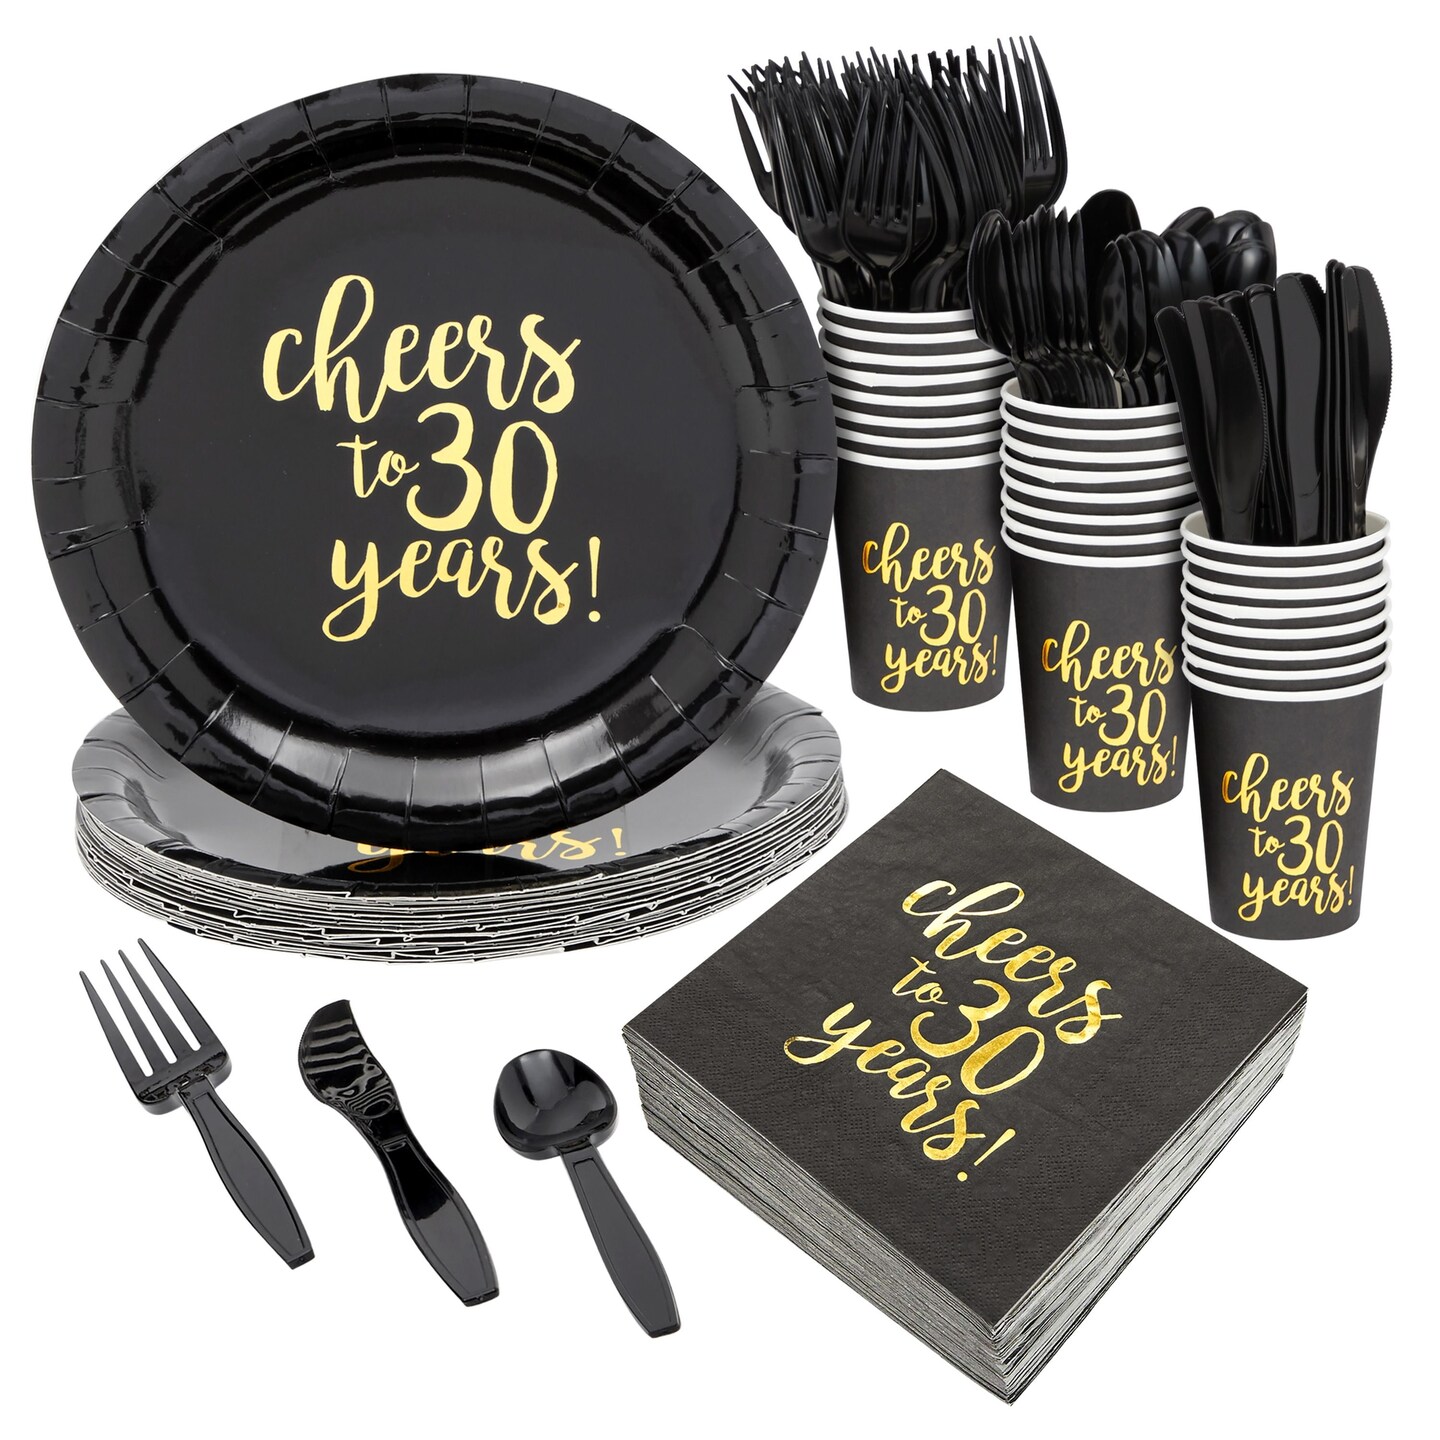 144-Piece Cheers to 30 Years Plates, Napkins, Cutlery, and Cups for Black and Gold 30th Birthday Party Supplies, Anniversary Decorations (Serves 24)